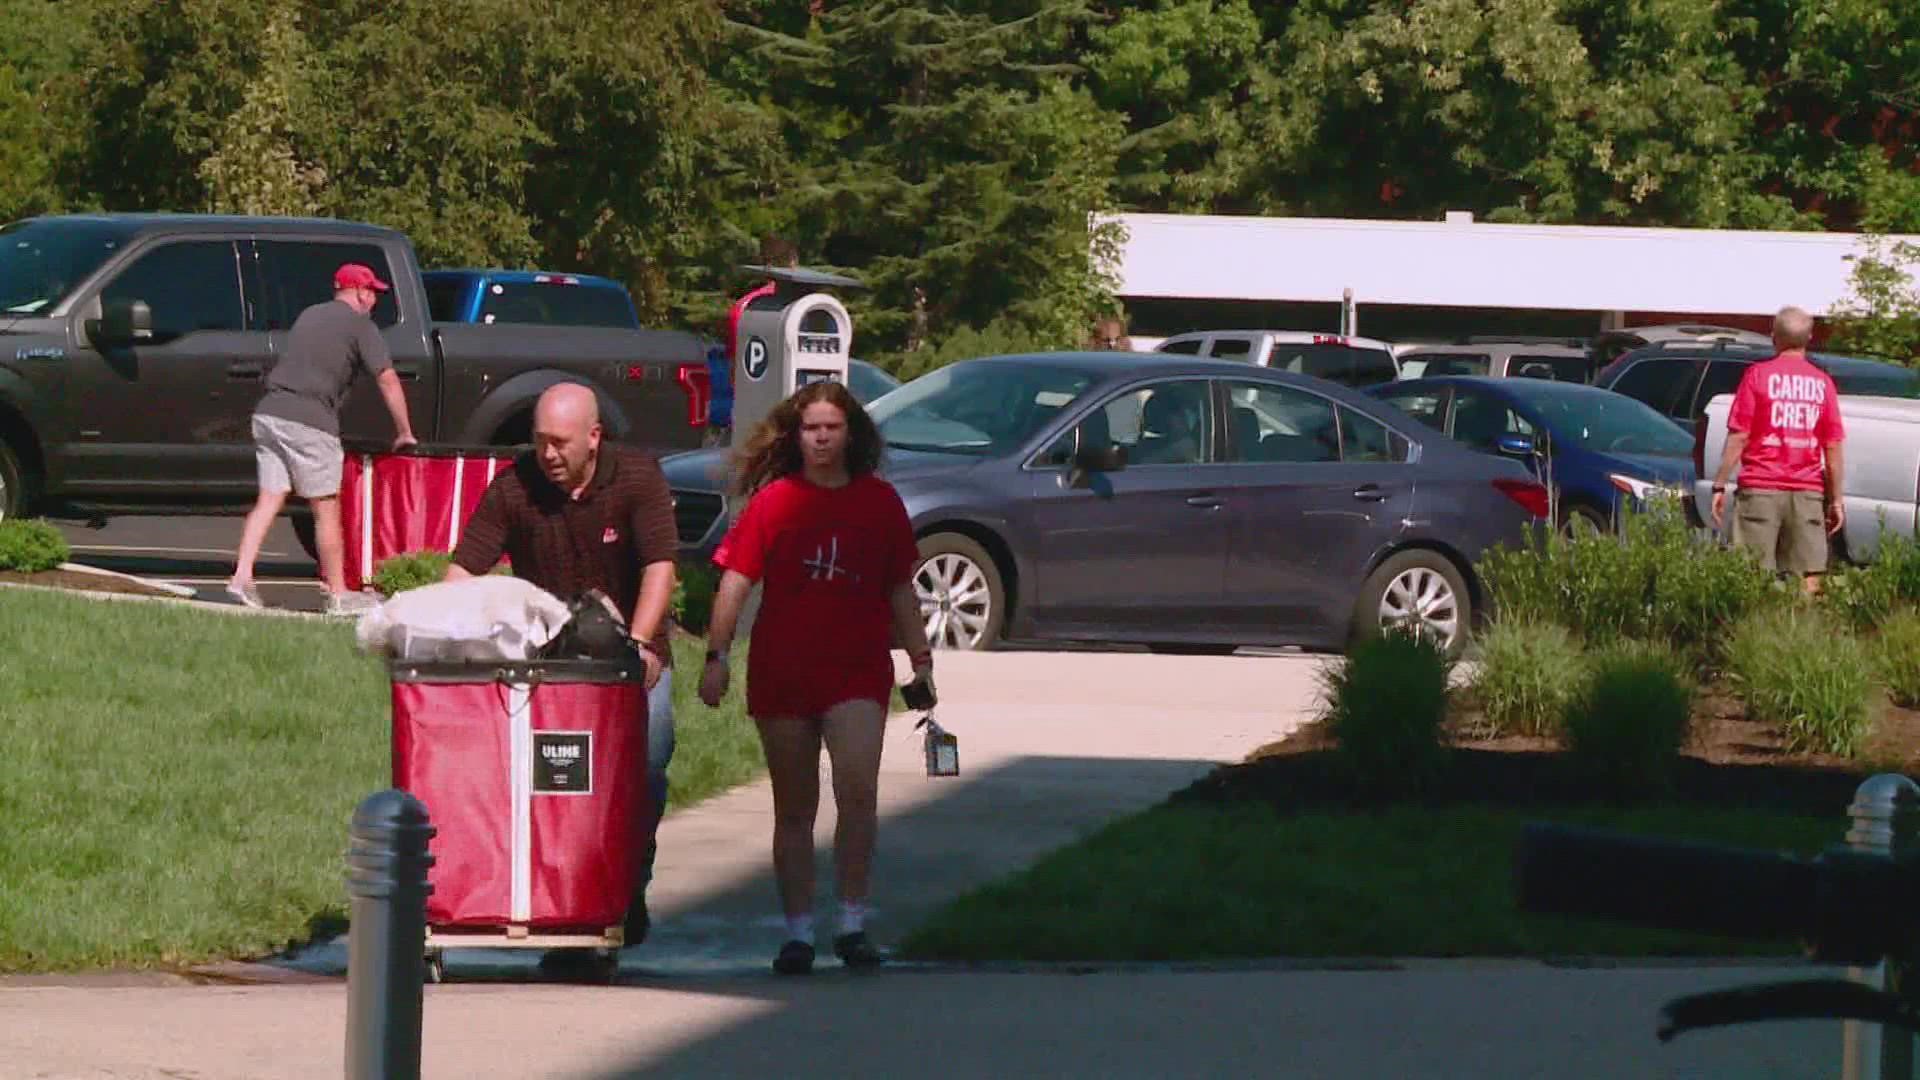 Students from Bellarmine, the University of Louisville and Kentucky start moving into their dorms ahead of the first day.